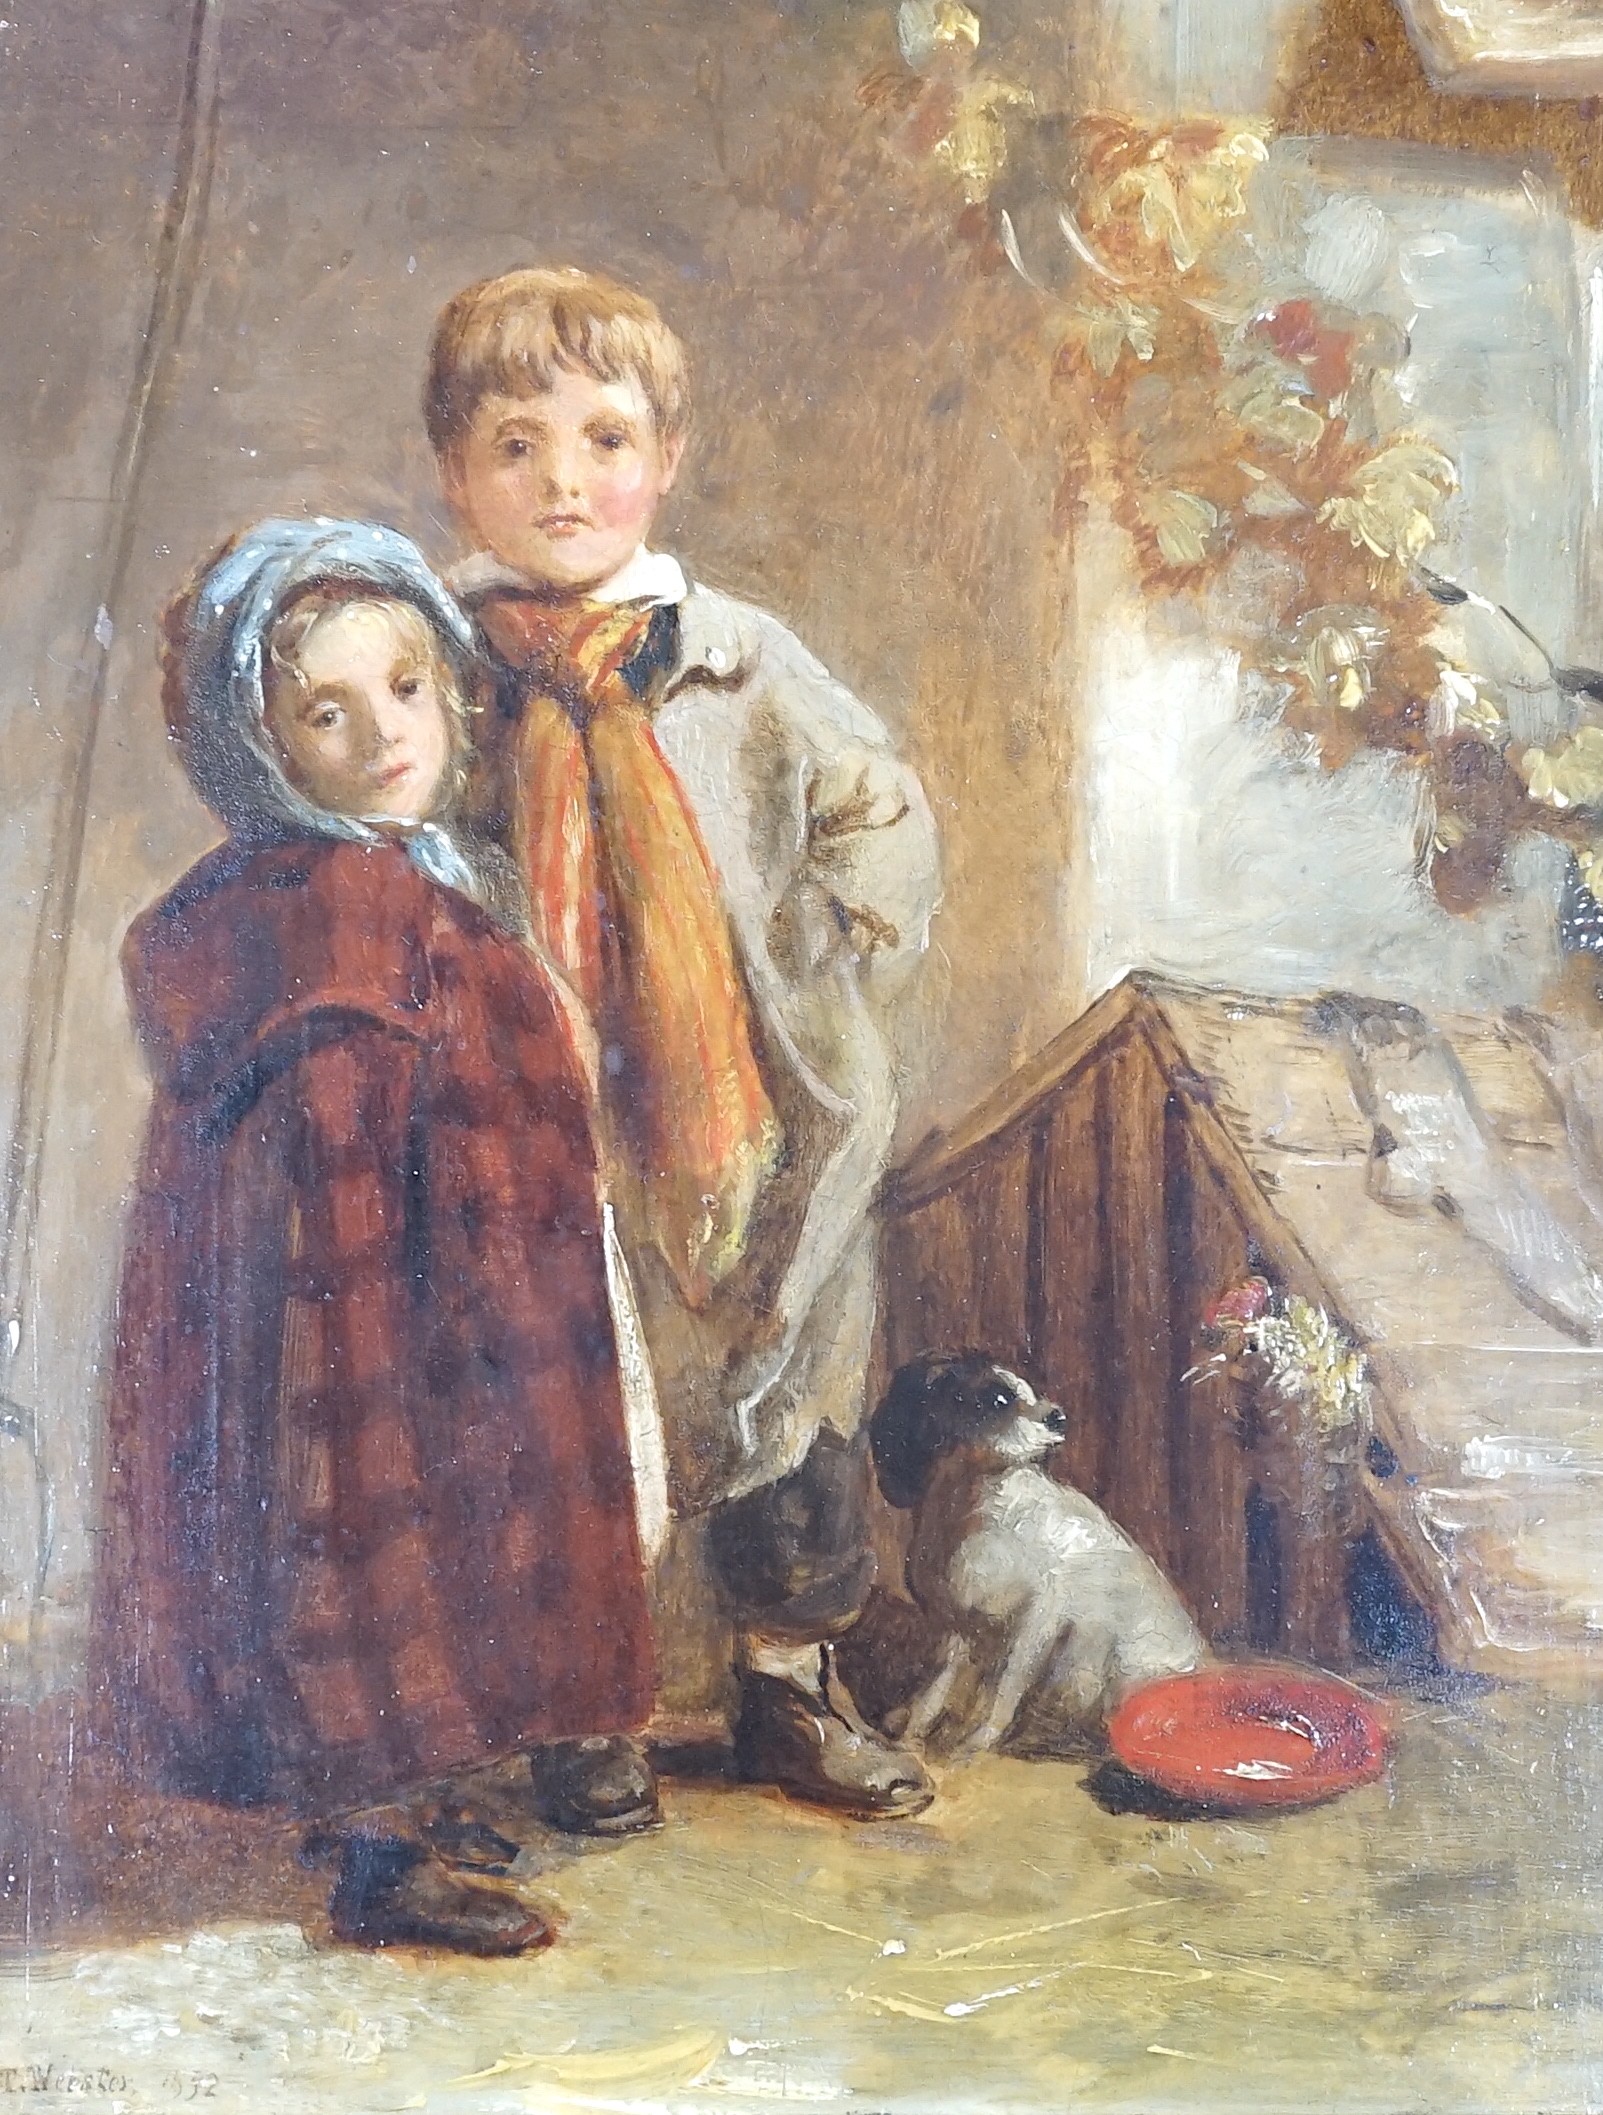 Thomas Webster (1800-1886), oil on wooden panel, Children standing beside a kennel, signed and dated 1852, Cider House Galleries label verso, 25 x 19cm